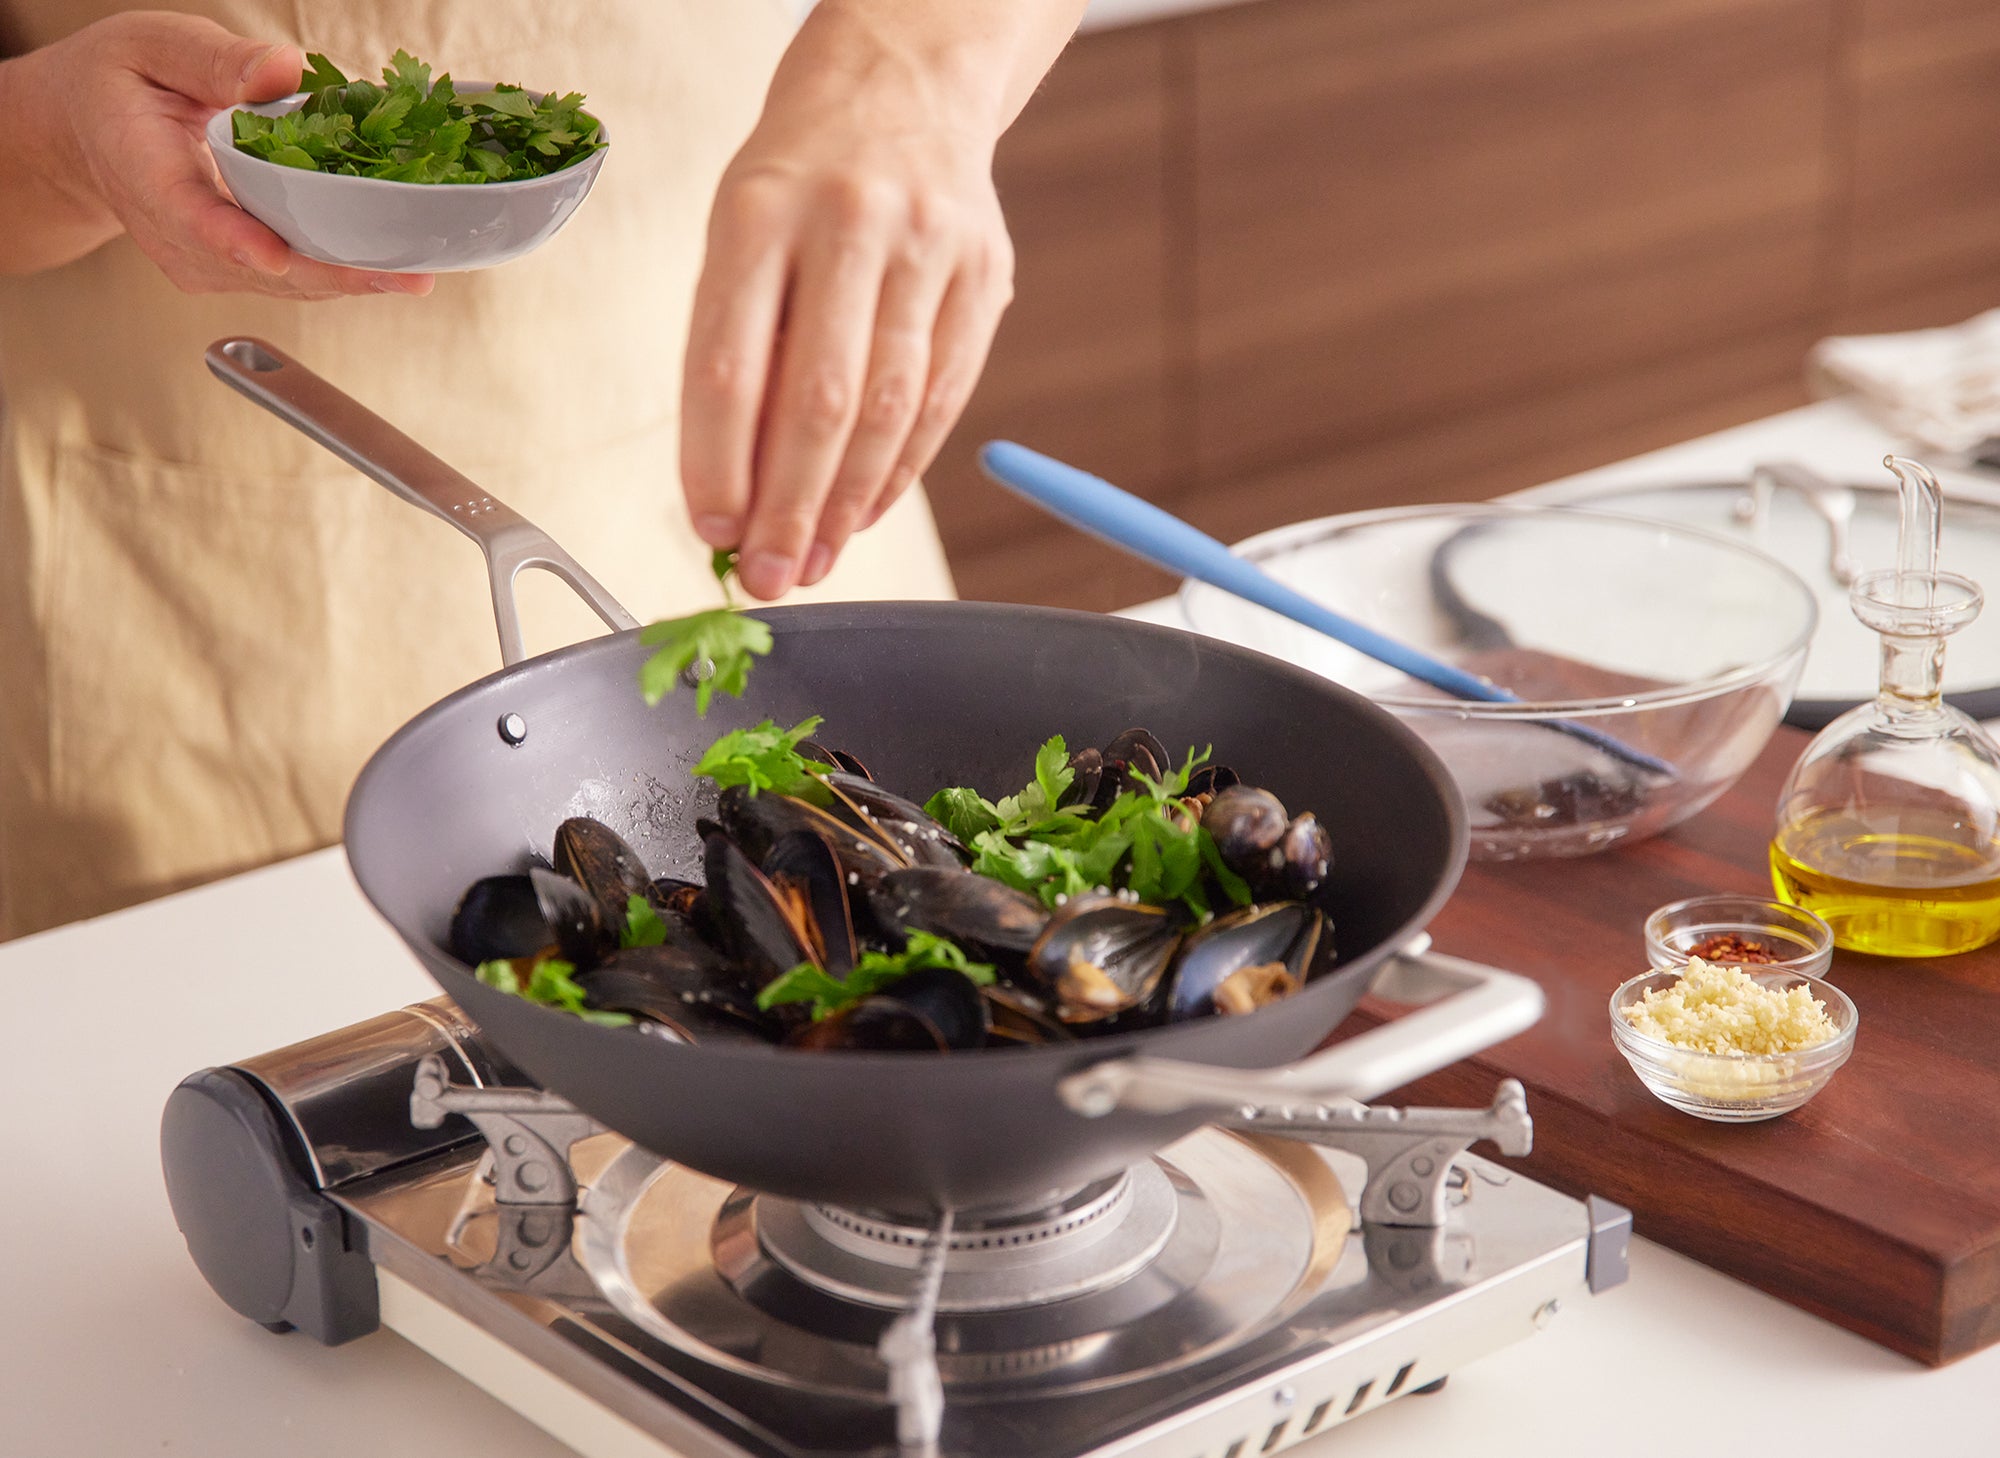 {{12-inch}} A chef sprinkles herbs into a pile of muscles inside a Misen Carbon Steel wok, which sits atop a single burner. Next to the wok is a cutting board with assorted garnishes and oils.